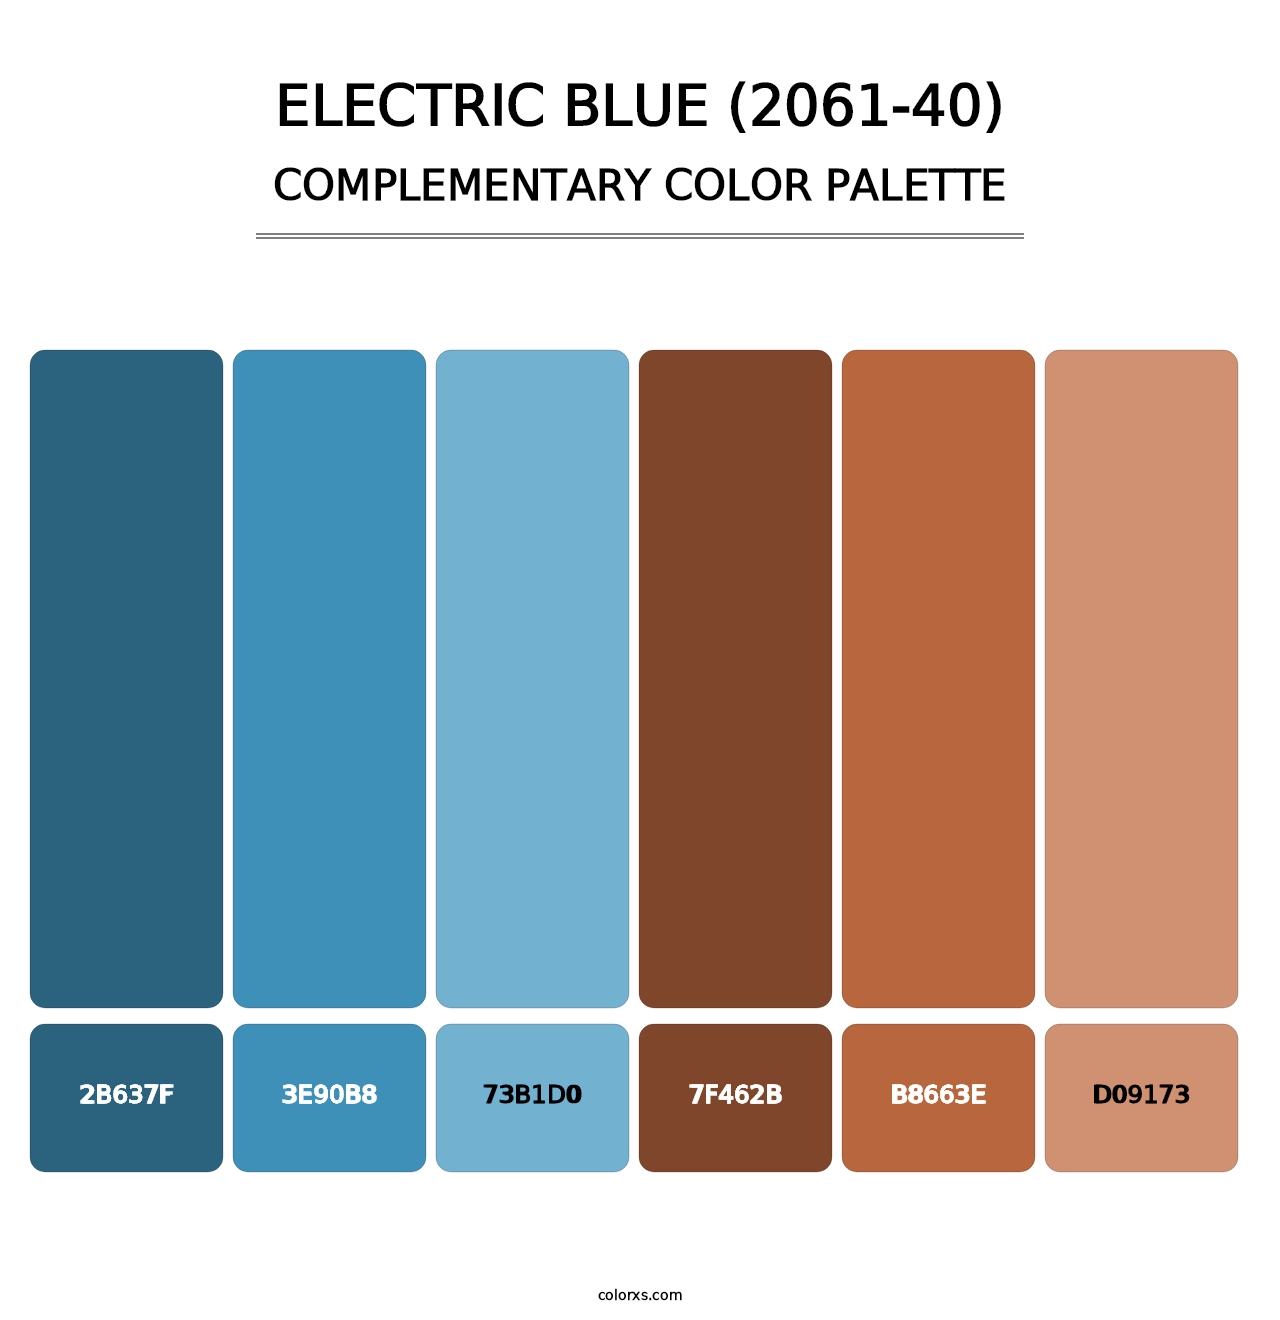 Electric Blue (2061-40) - Complementary Color Palette